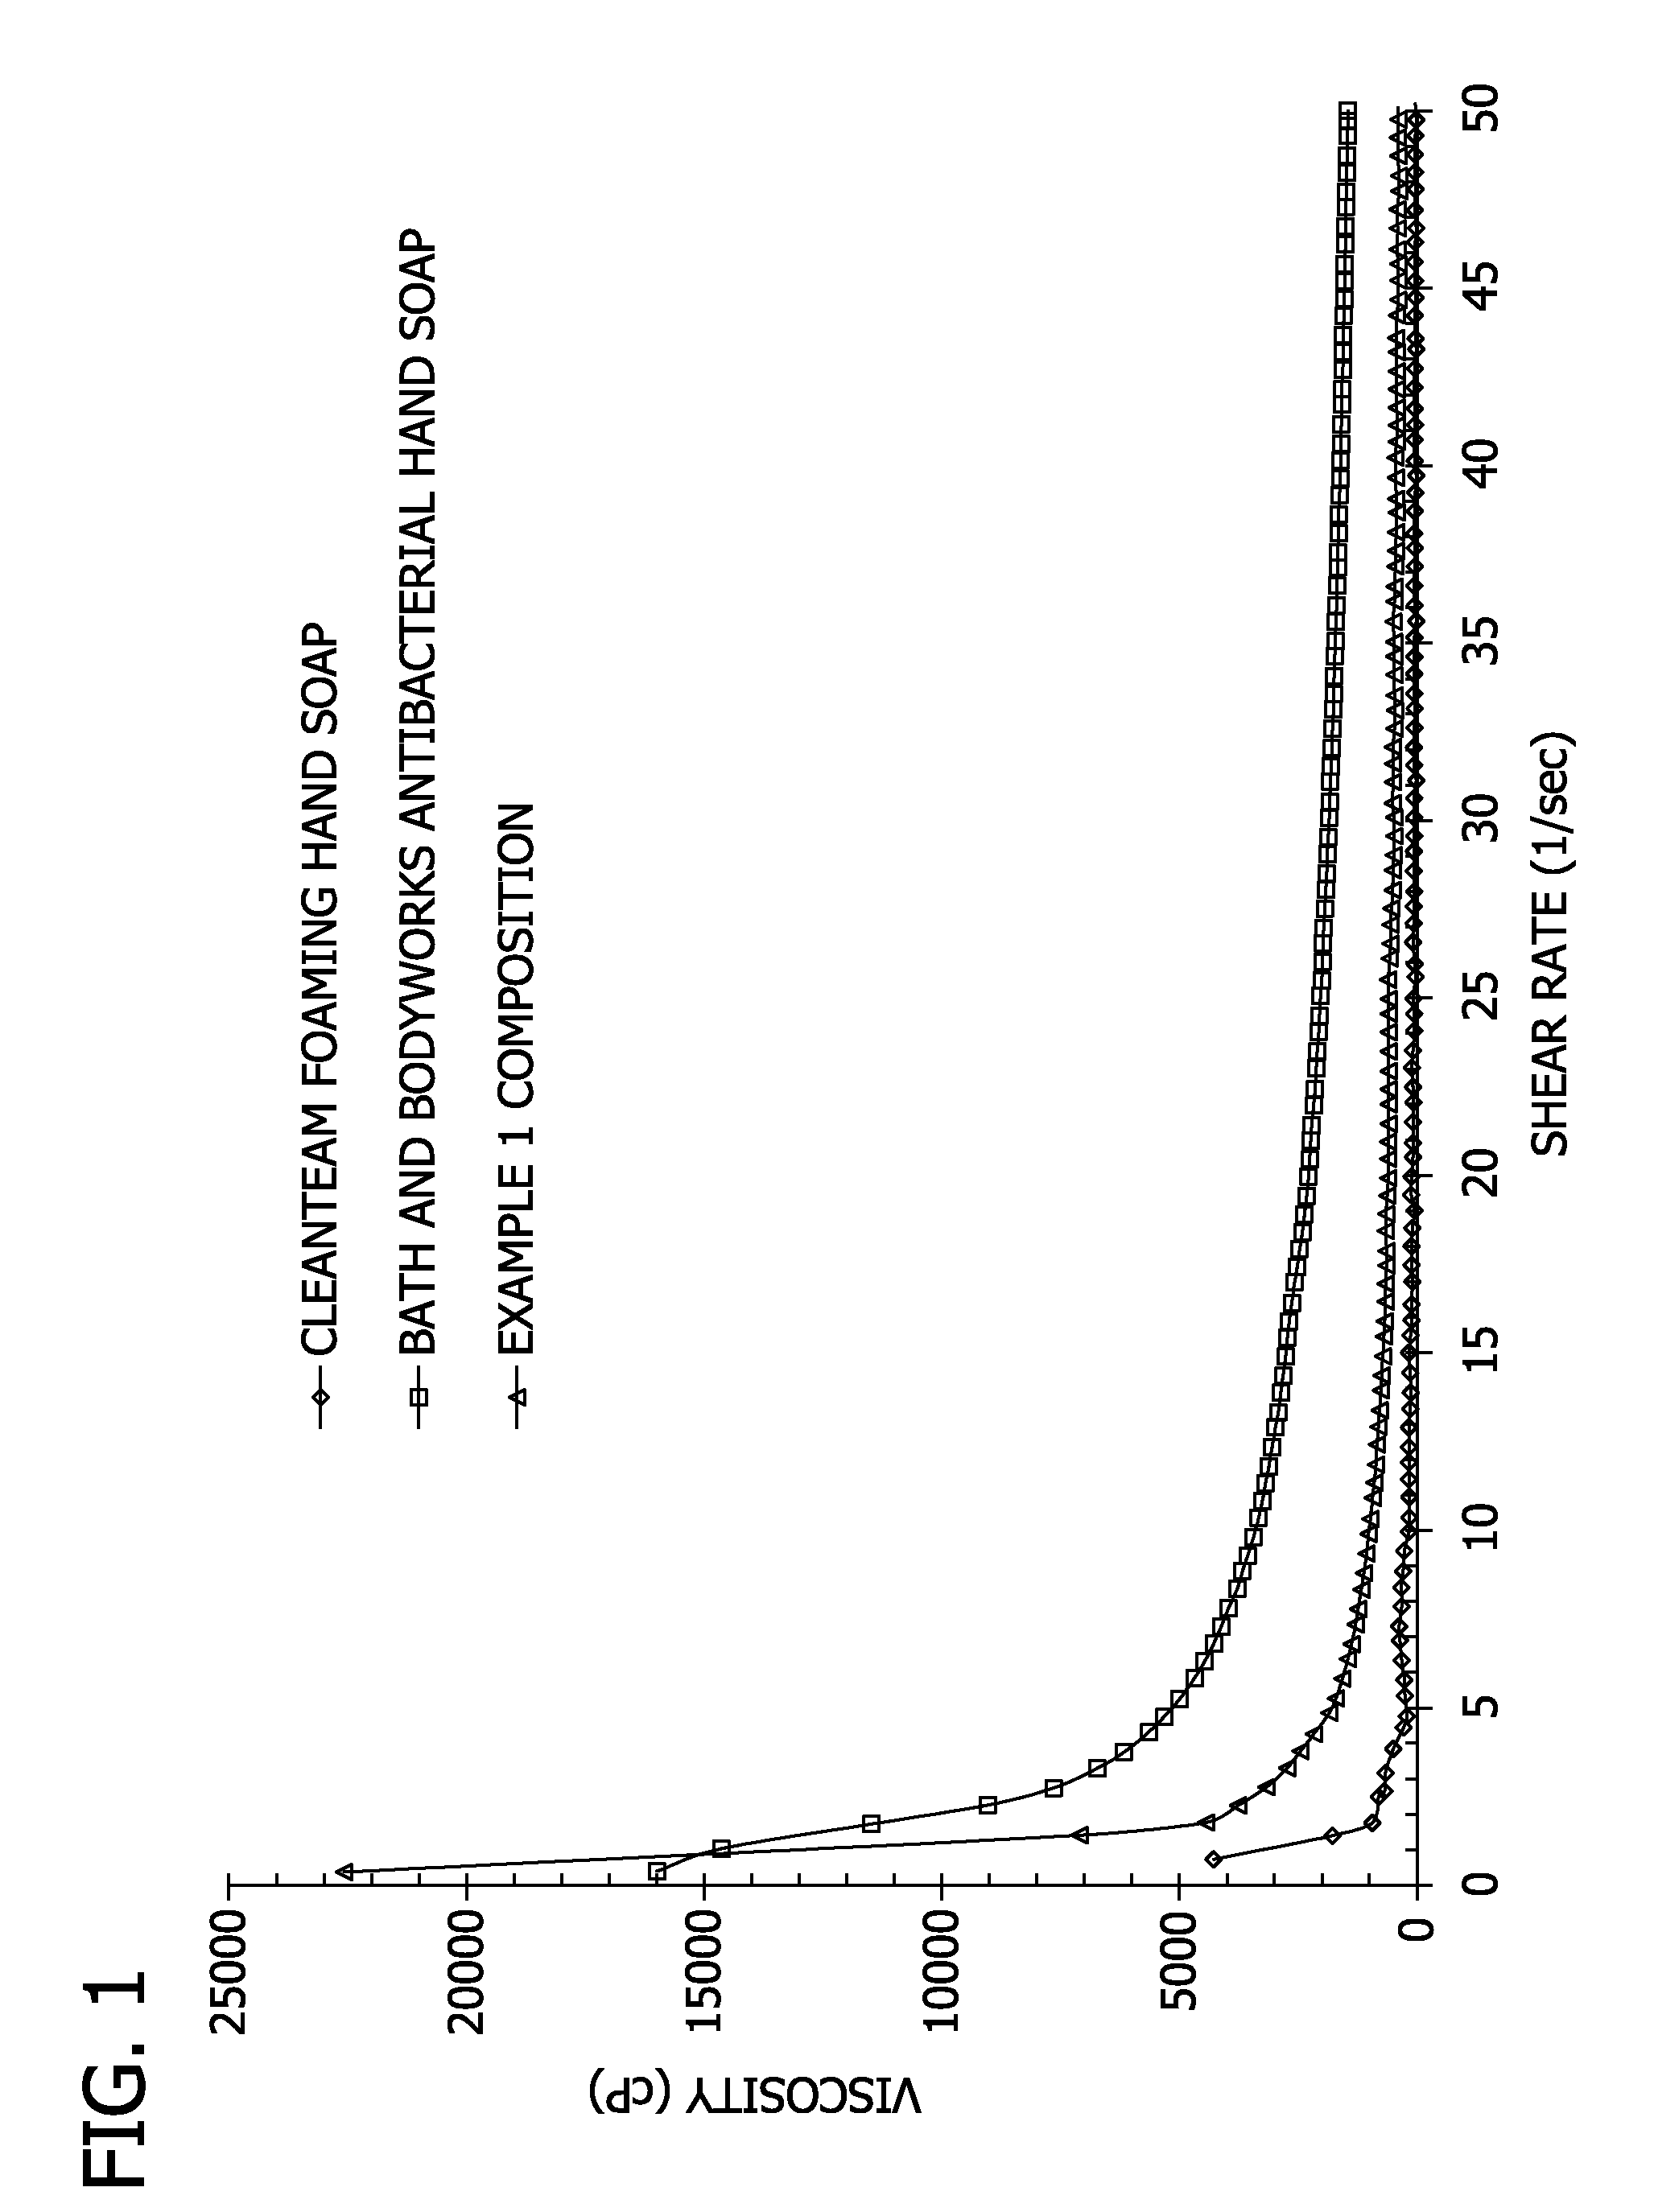 Liquid cleanser formulation with suspending and foaming capabilities